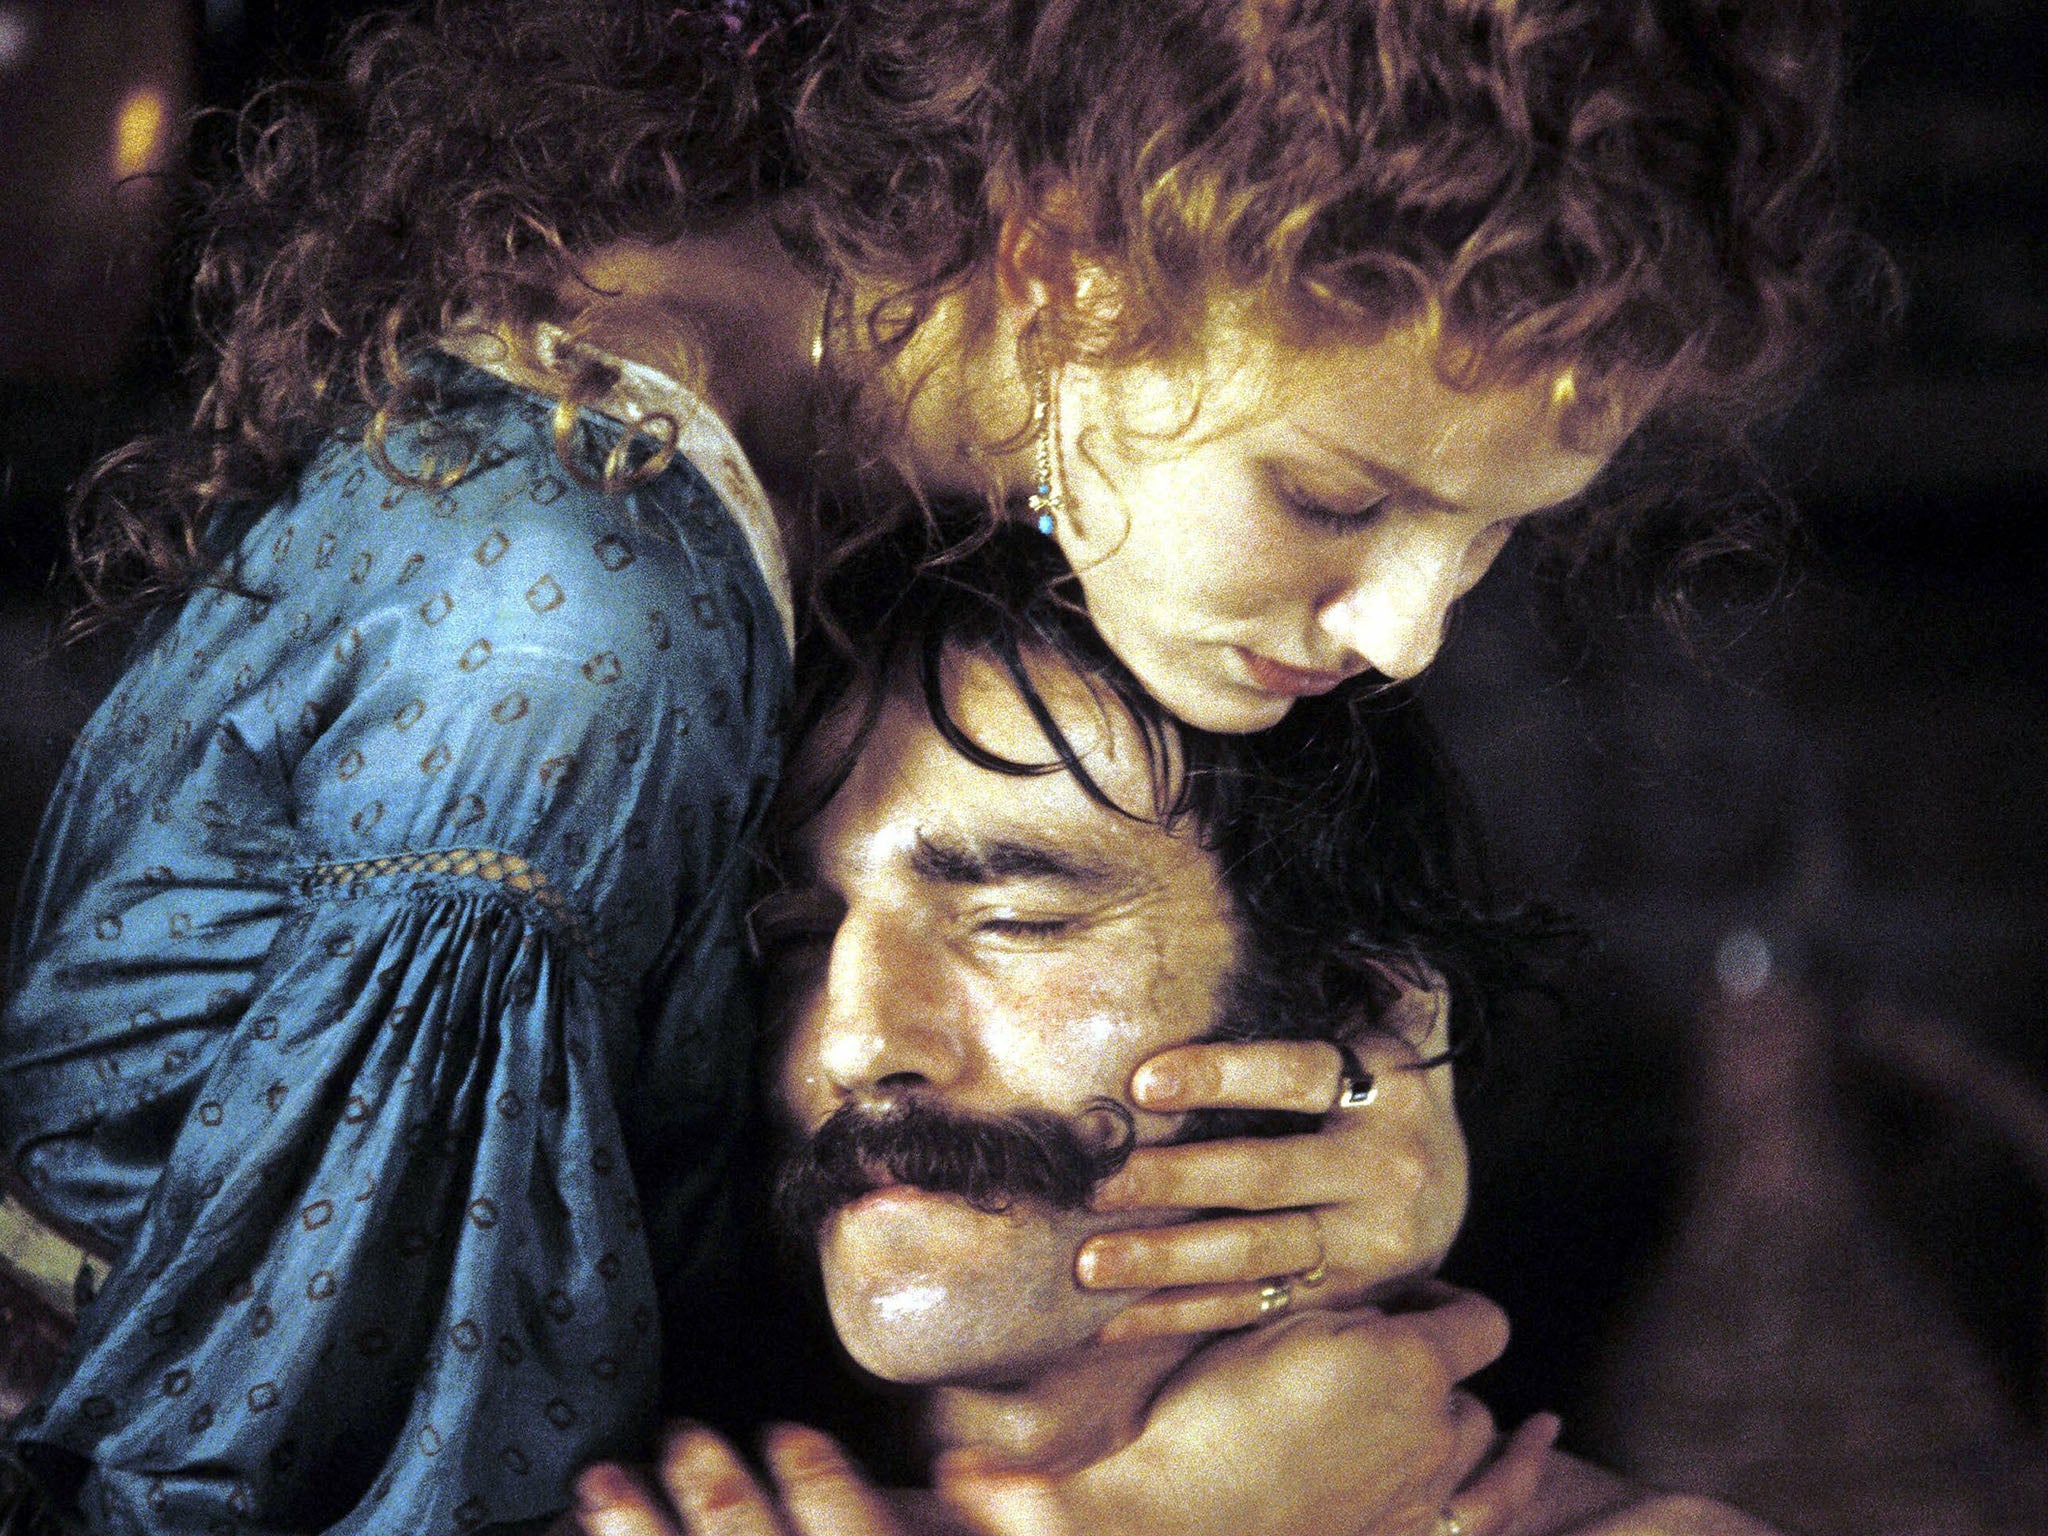 Cameron Diaz and Daniel Day-Lewis in ‘The Gangs of New York’ (Rex)